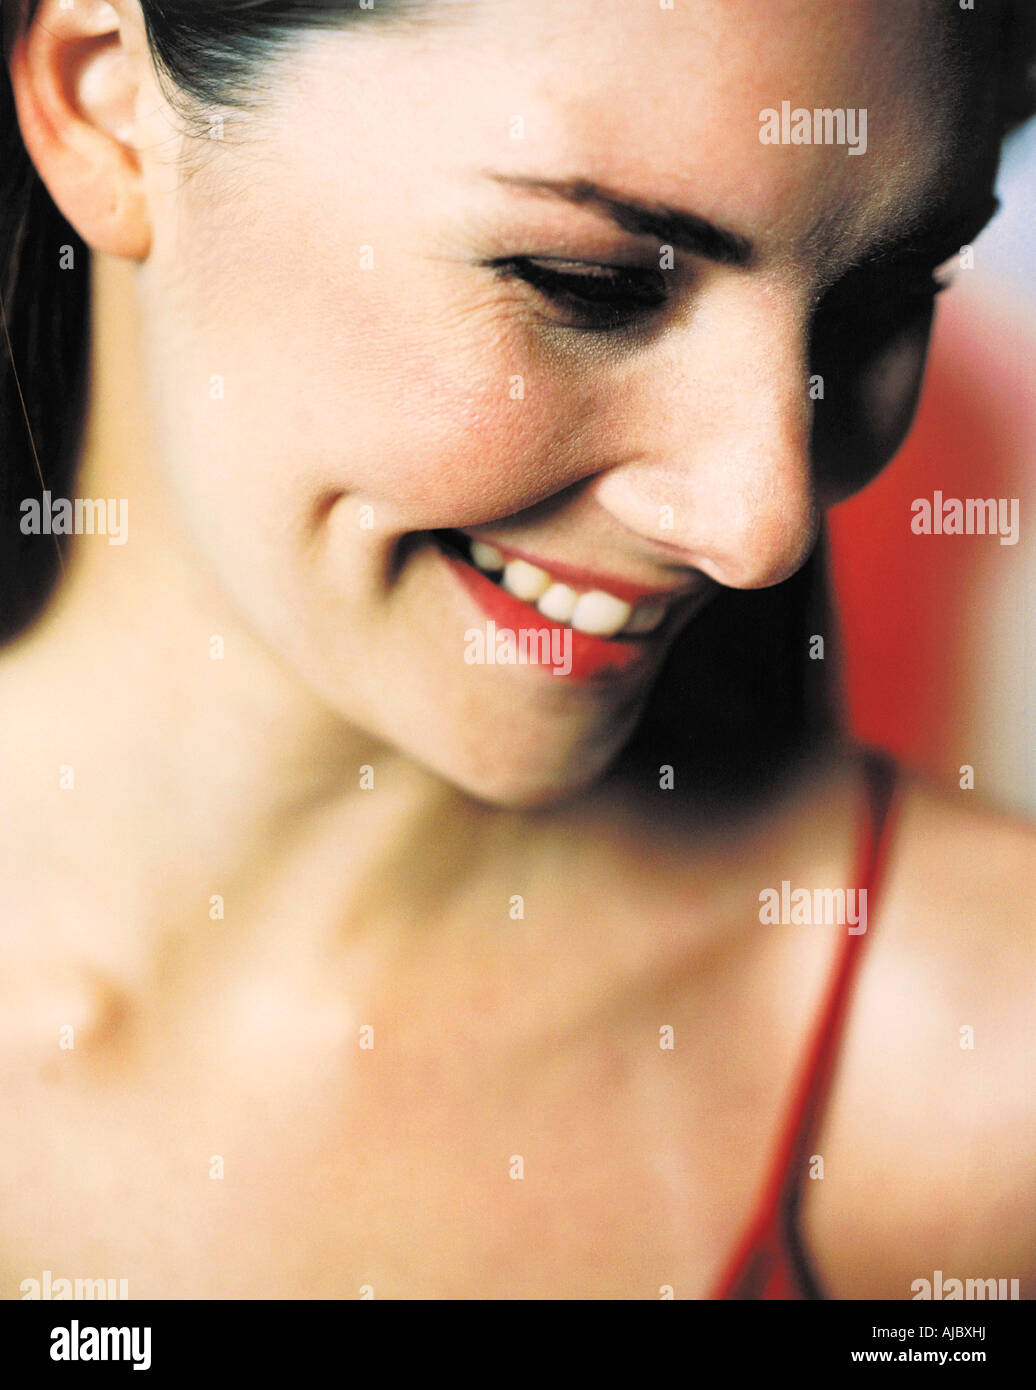 Portrait of a Young Woman Smiling Stock Photo